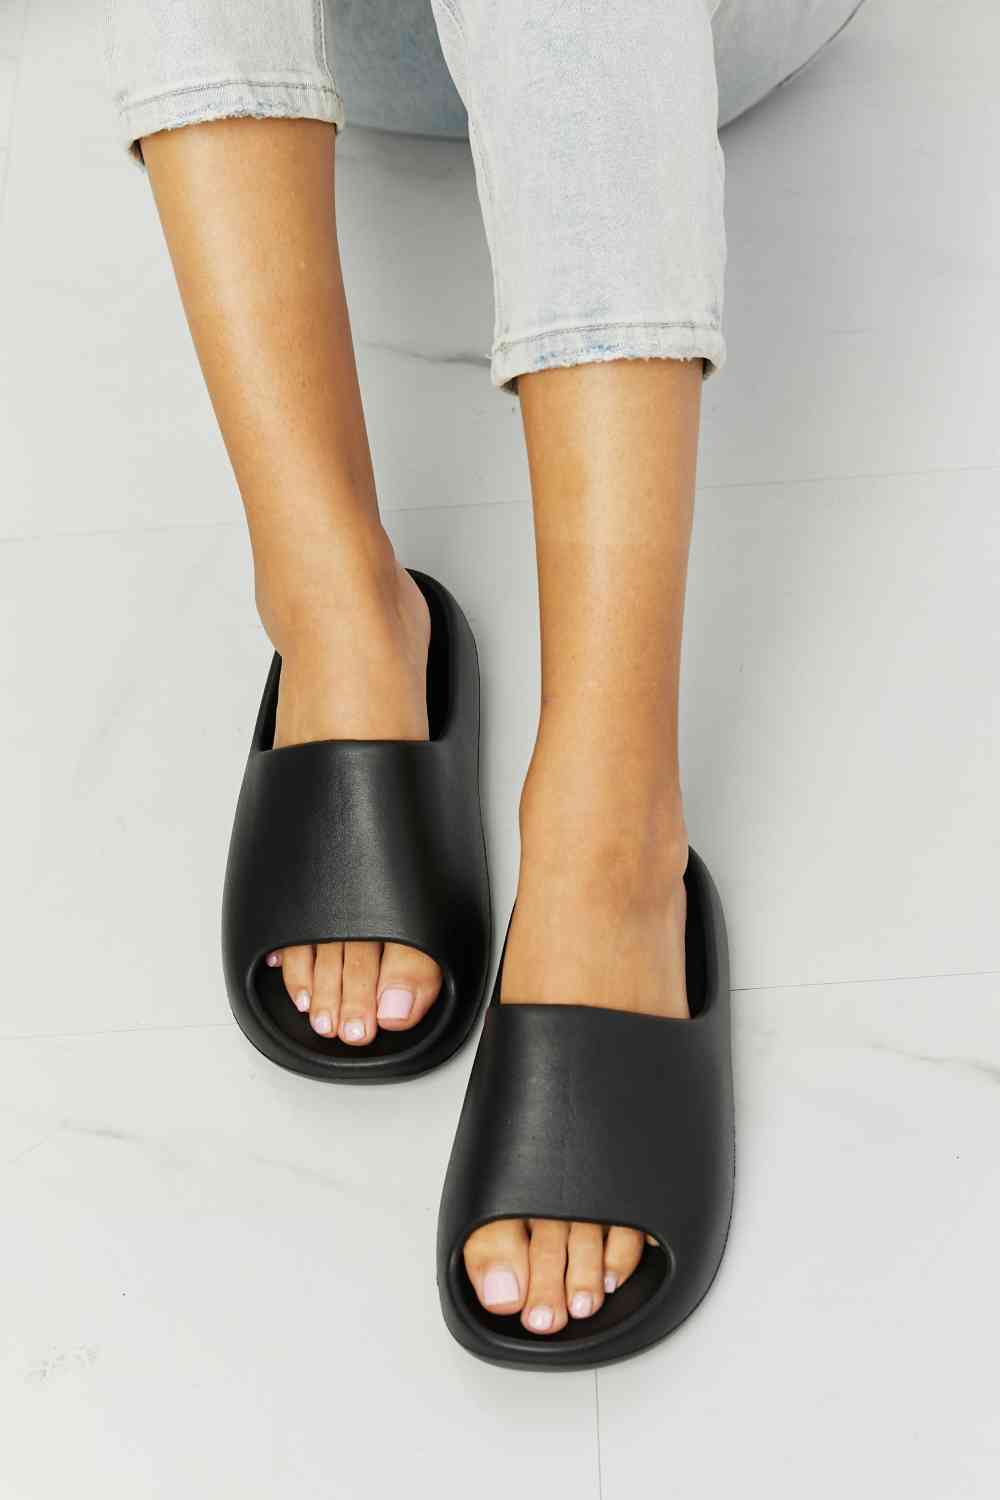 NOOK JOI In My Comfort Zone Slides in Black - Opulence & Essence